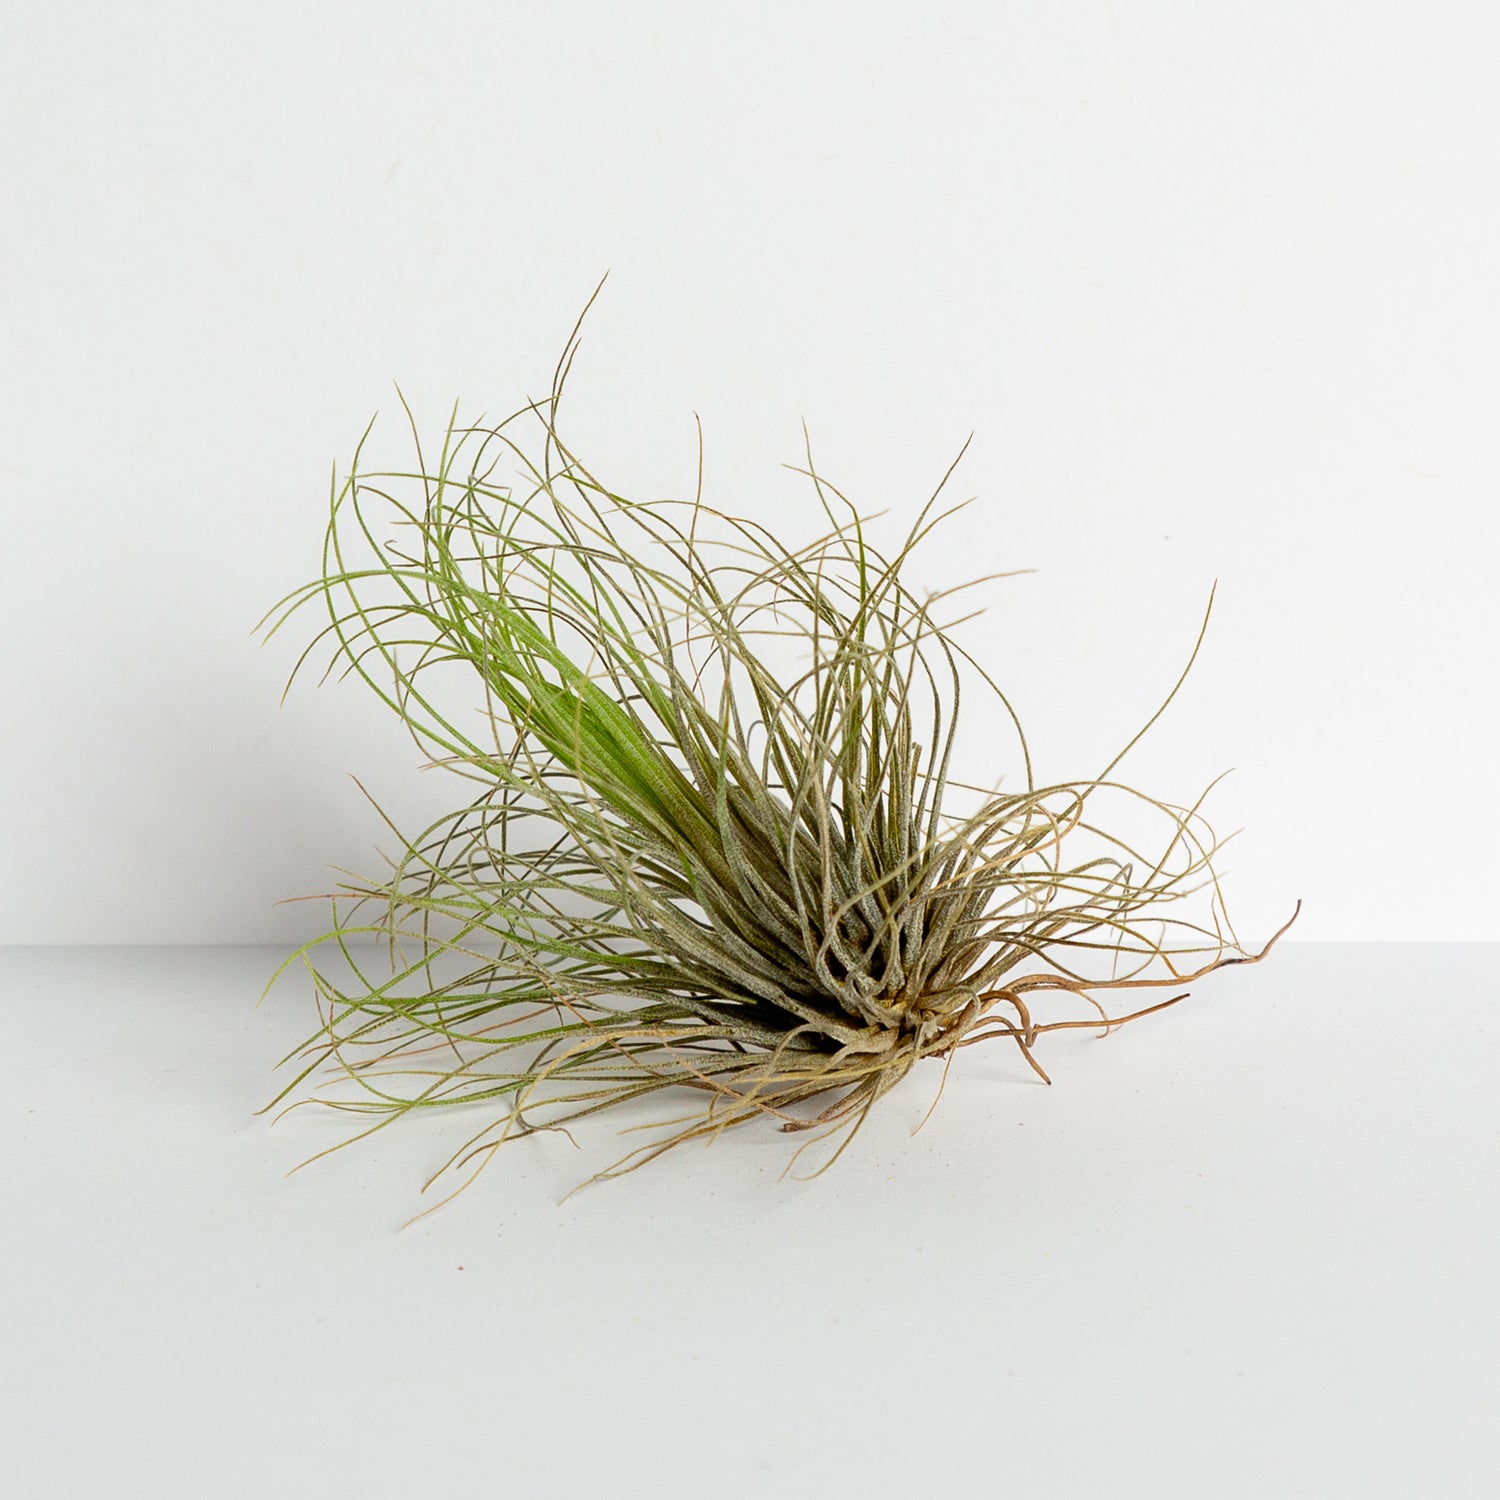 Air Plant 'Andreana' 1-2" - Urban Sprouts